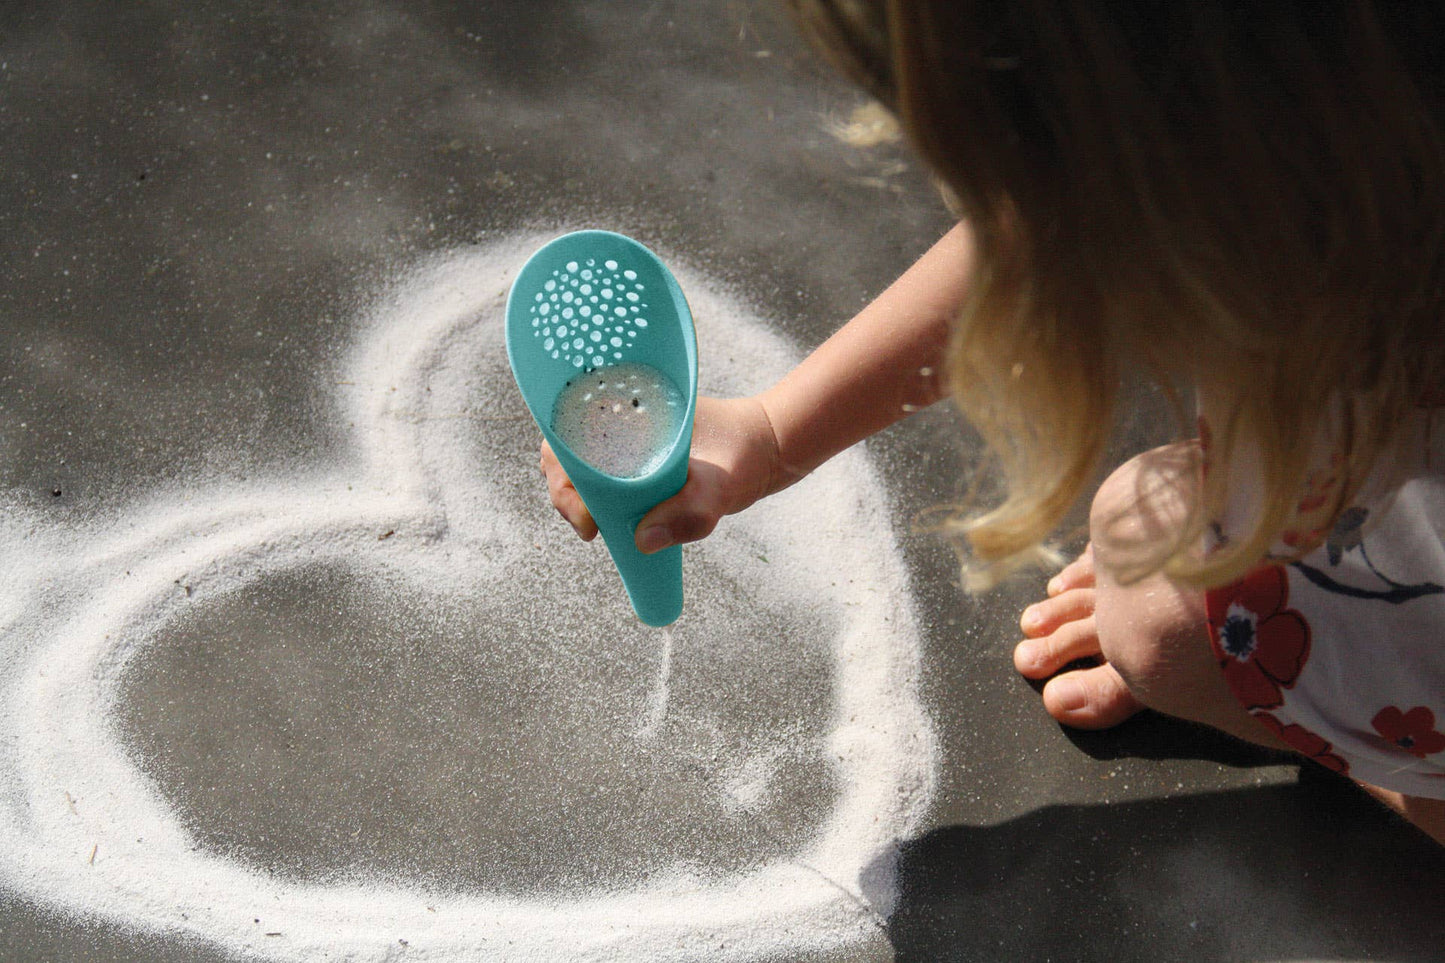 Cuppi - Shovel, Sifter and Ball all in one!: